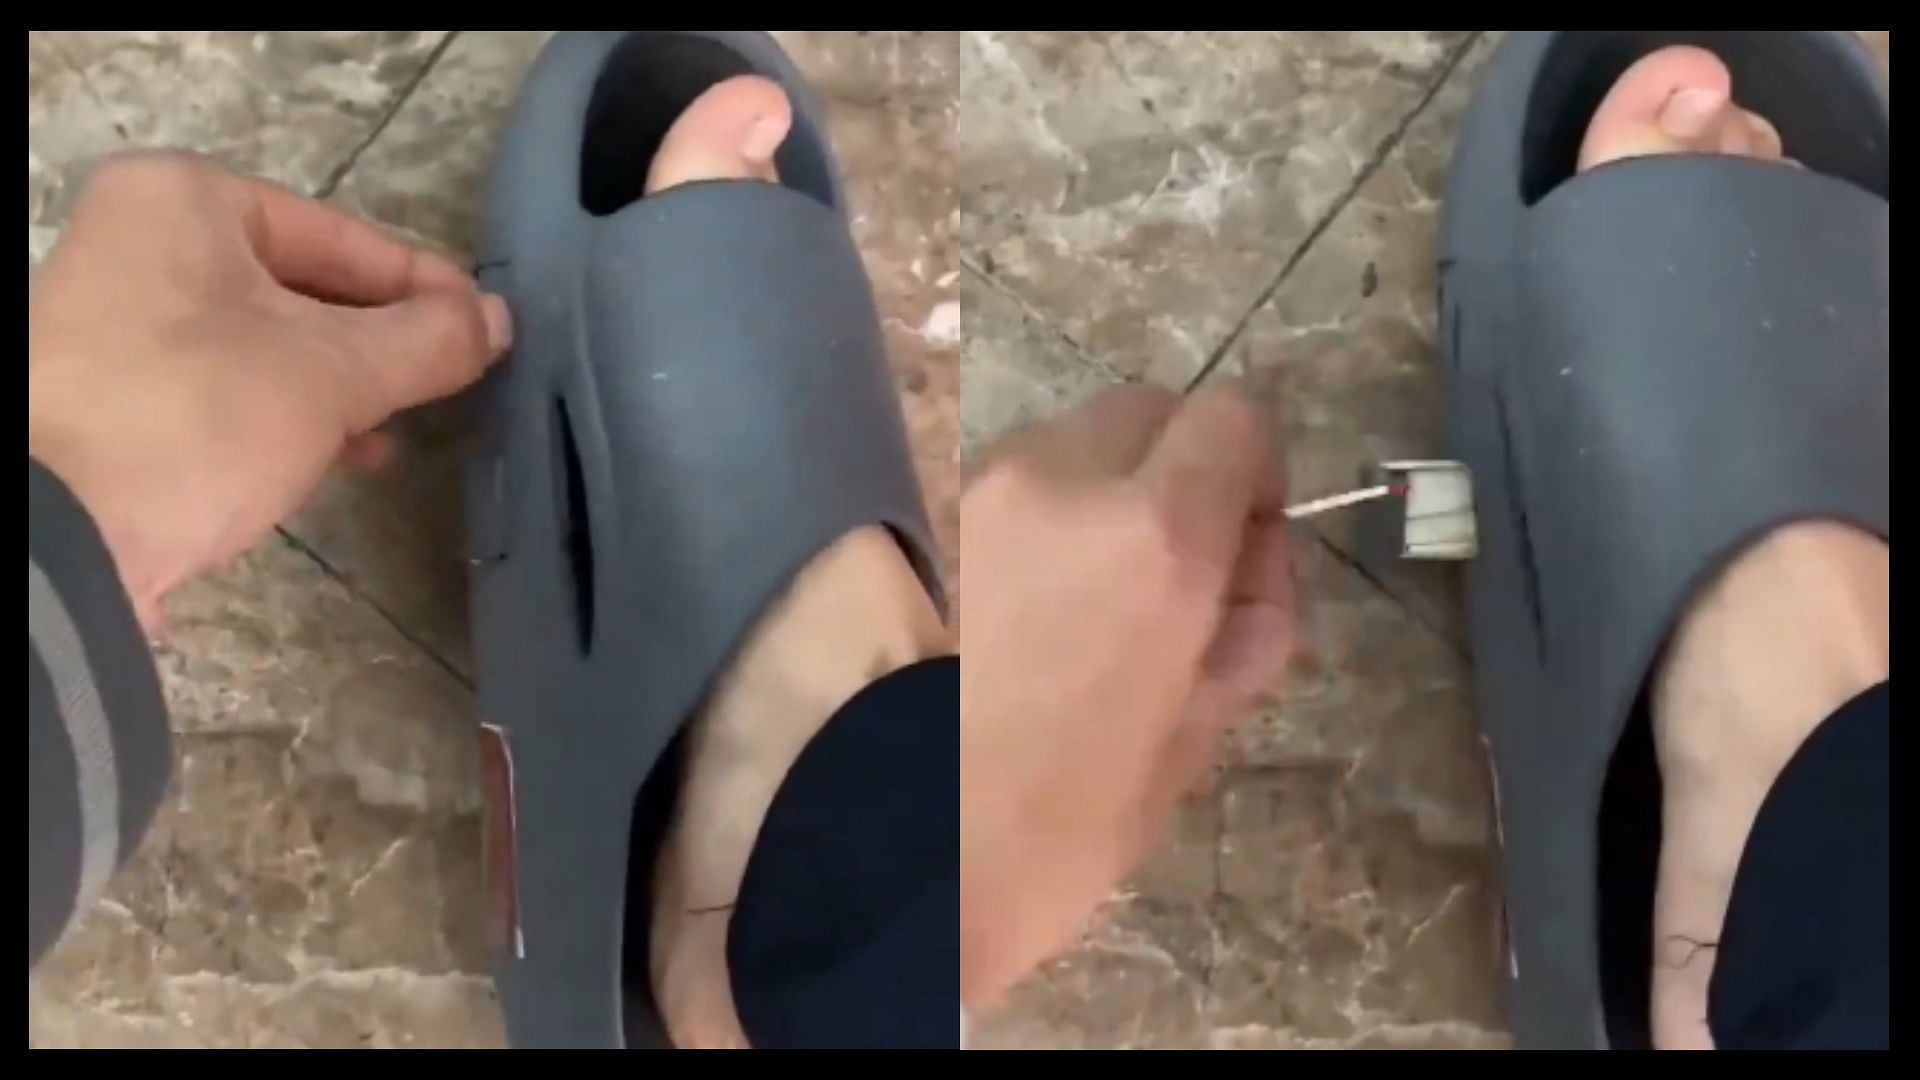 Man did an amazing jugaad making a place to hide cigarettes and matches in his slippers video viral on social